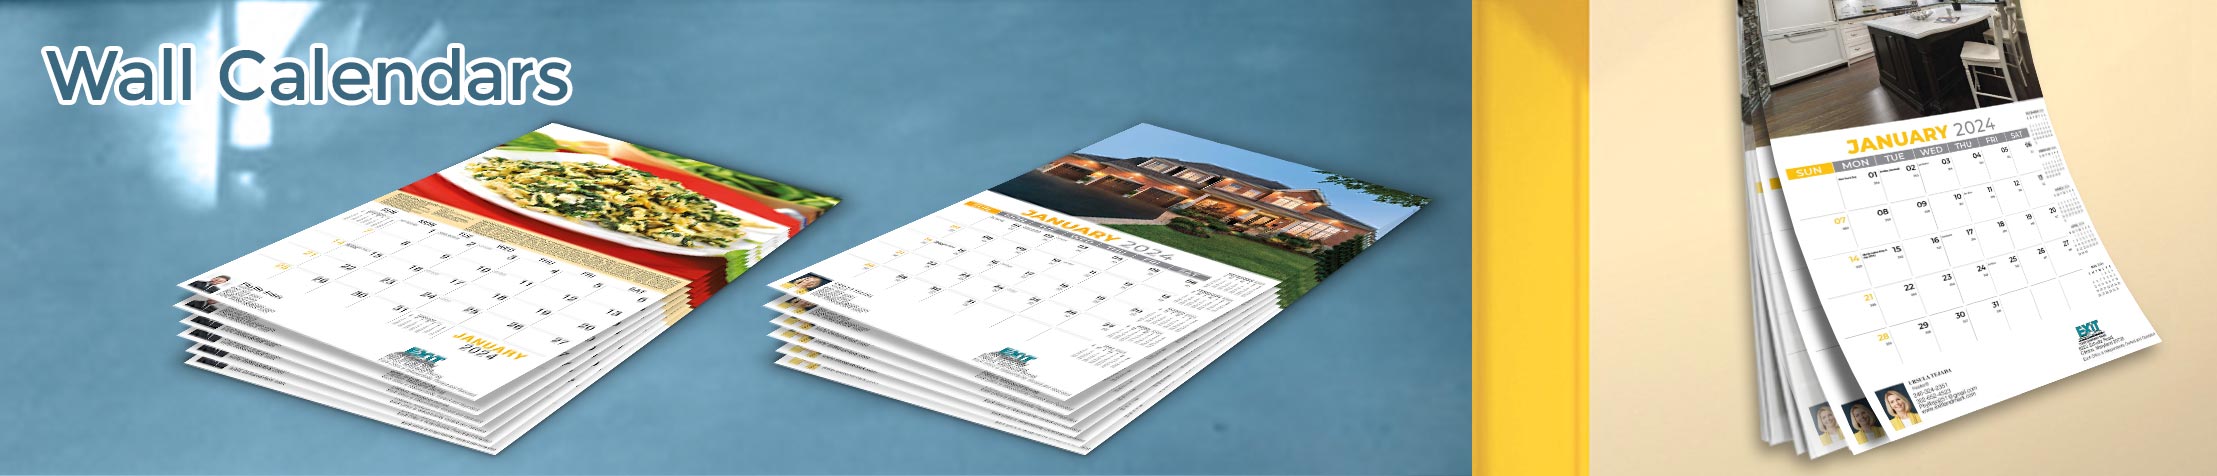 Exit Realty Wall Calendars - Exit Realty approved vendor 2019 wall calendars | BestPrintBuy.com